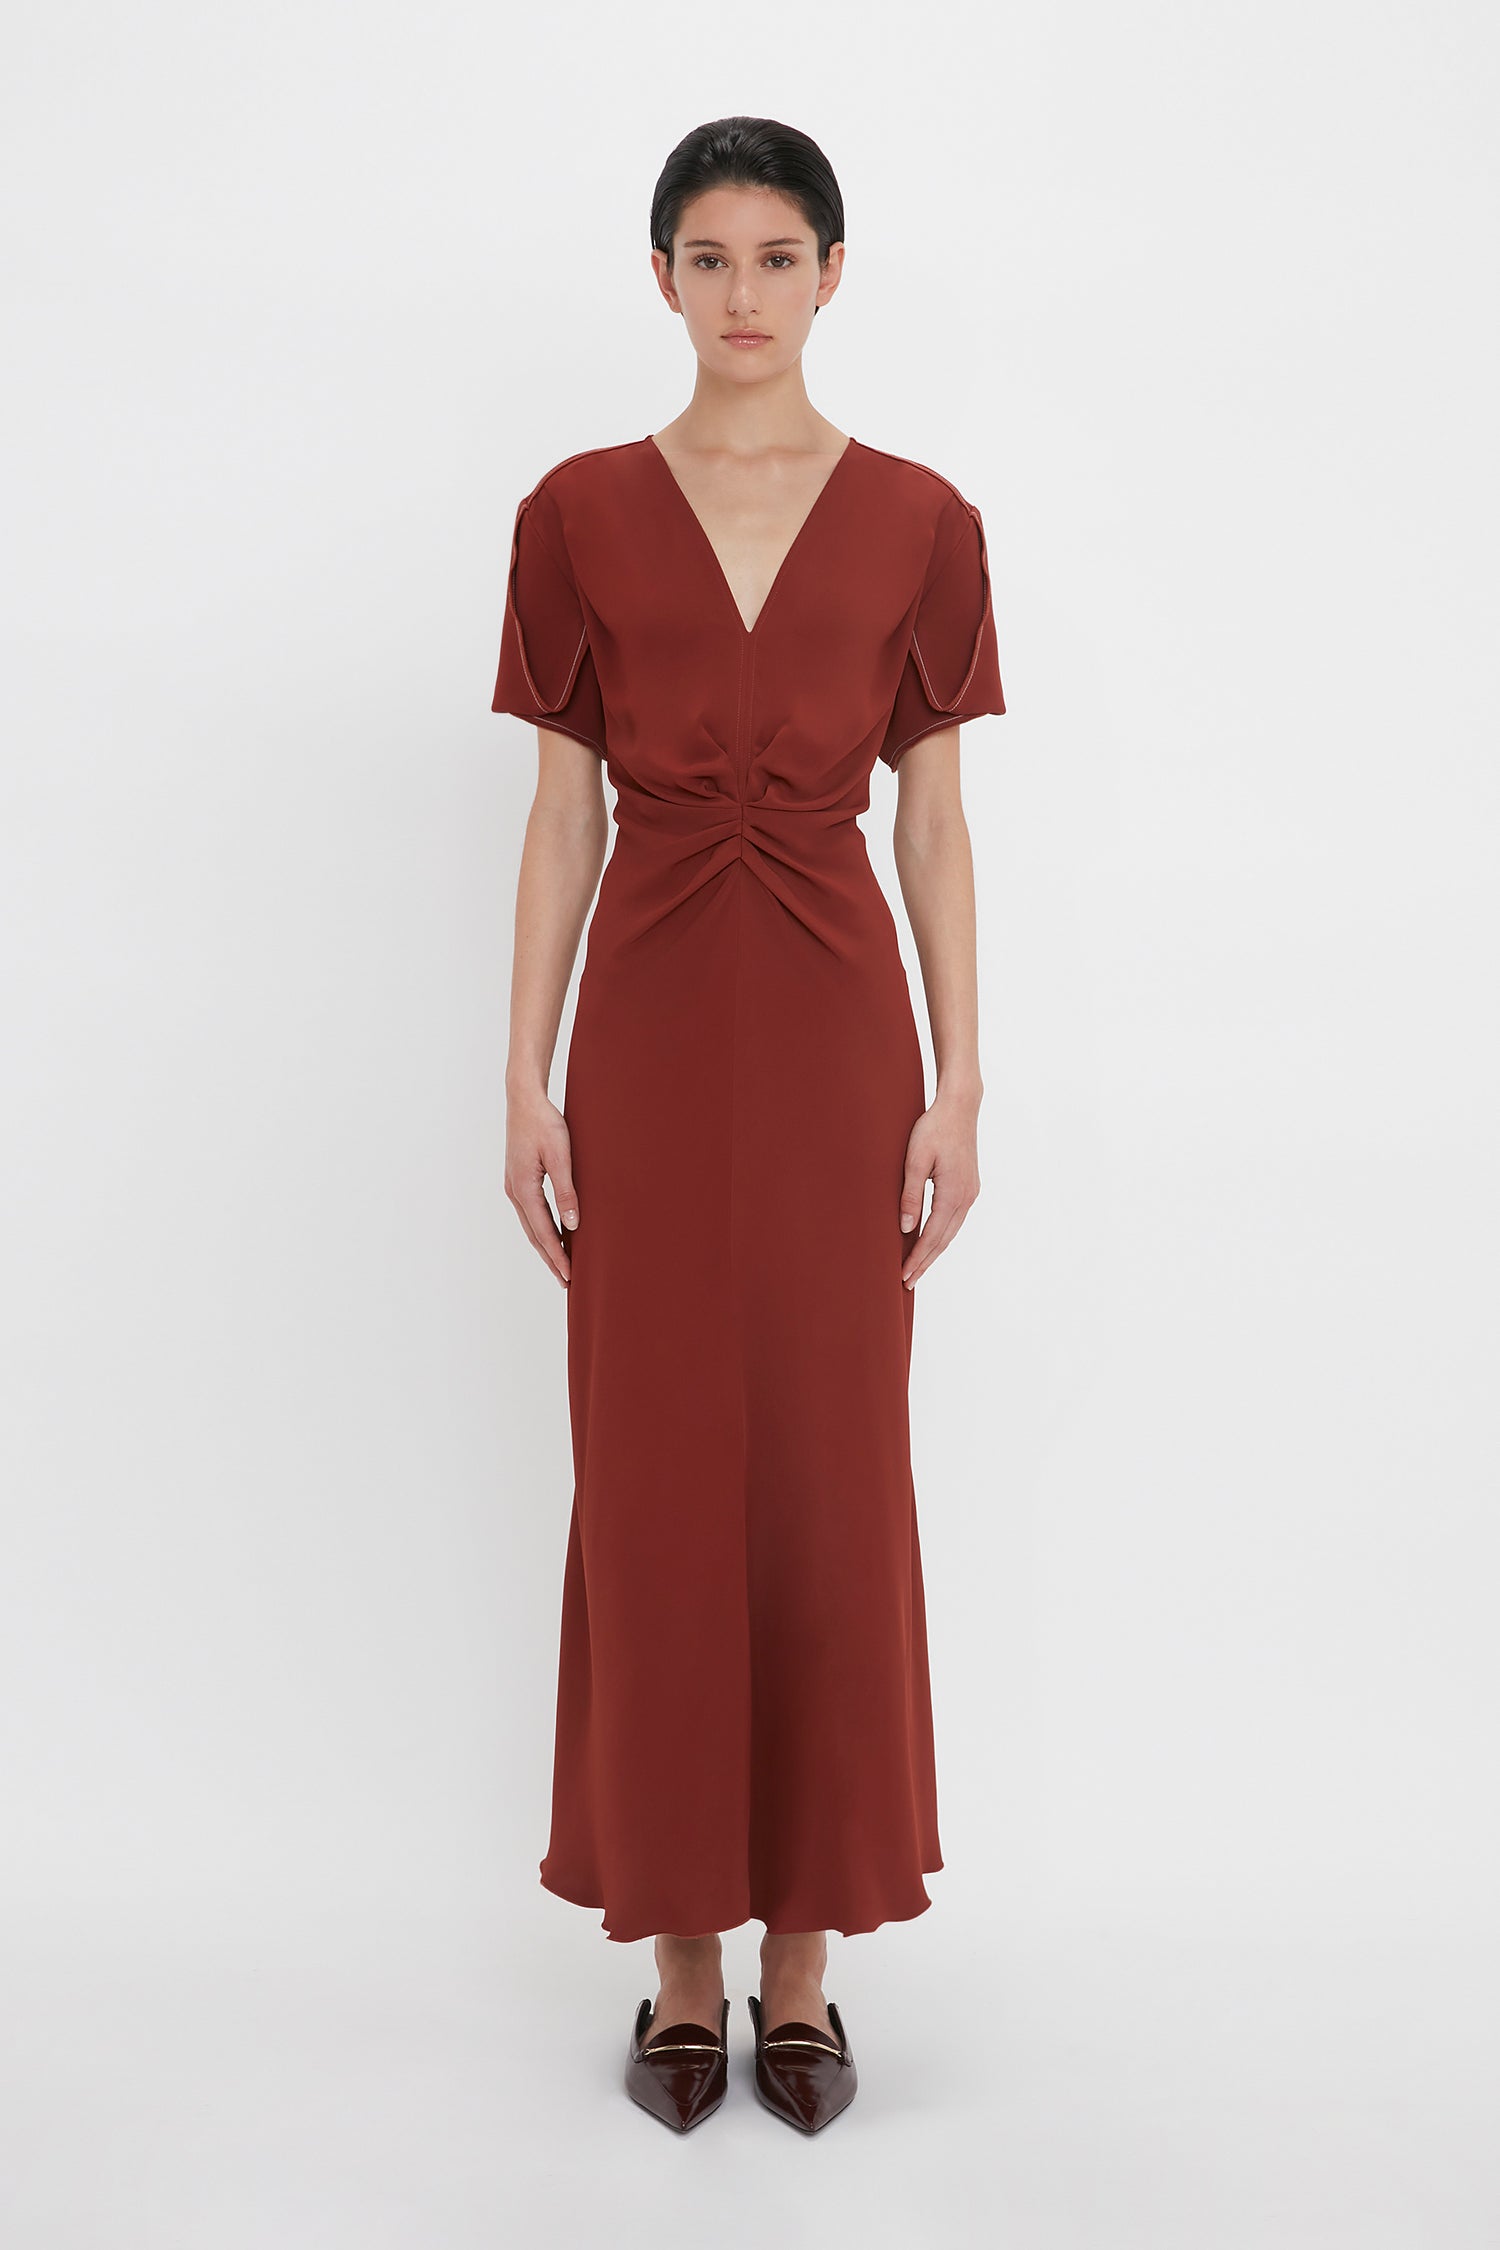 A person stands against a plain white background, wearing the Victoria Beckham Gathered V-Neck Midi Dress In Russet. The figure-flattering stretch fabric accents their shape perfectly. They complete the look with brown pointed shoes and short, dark hair.